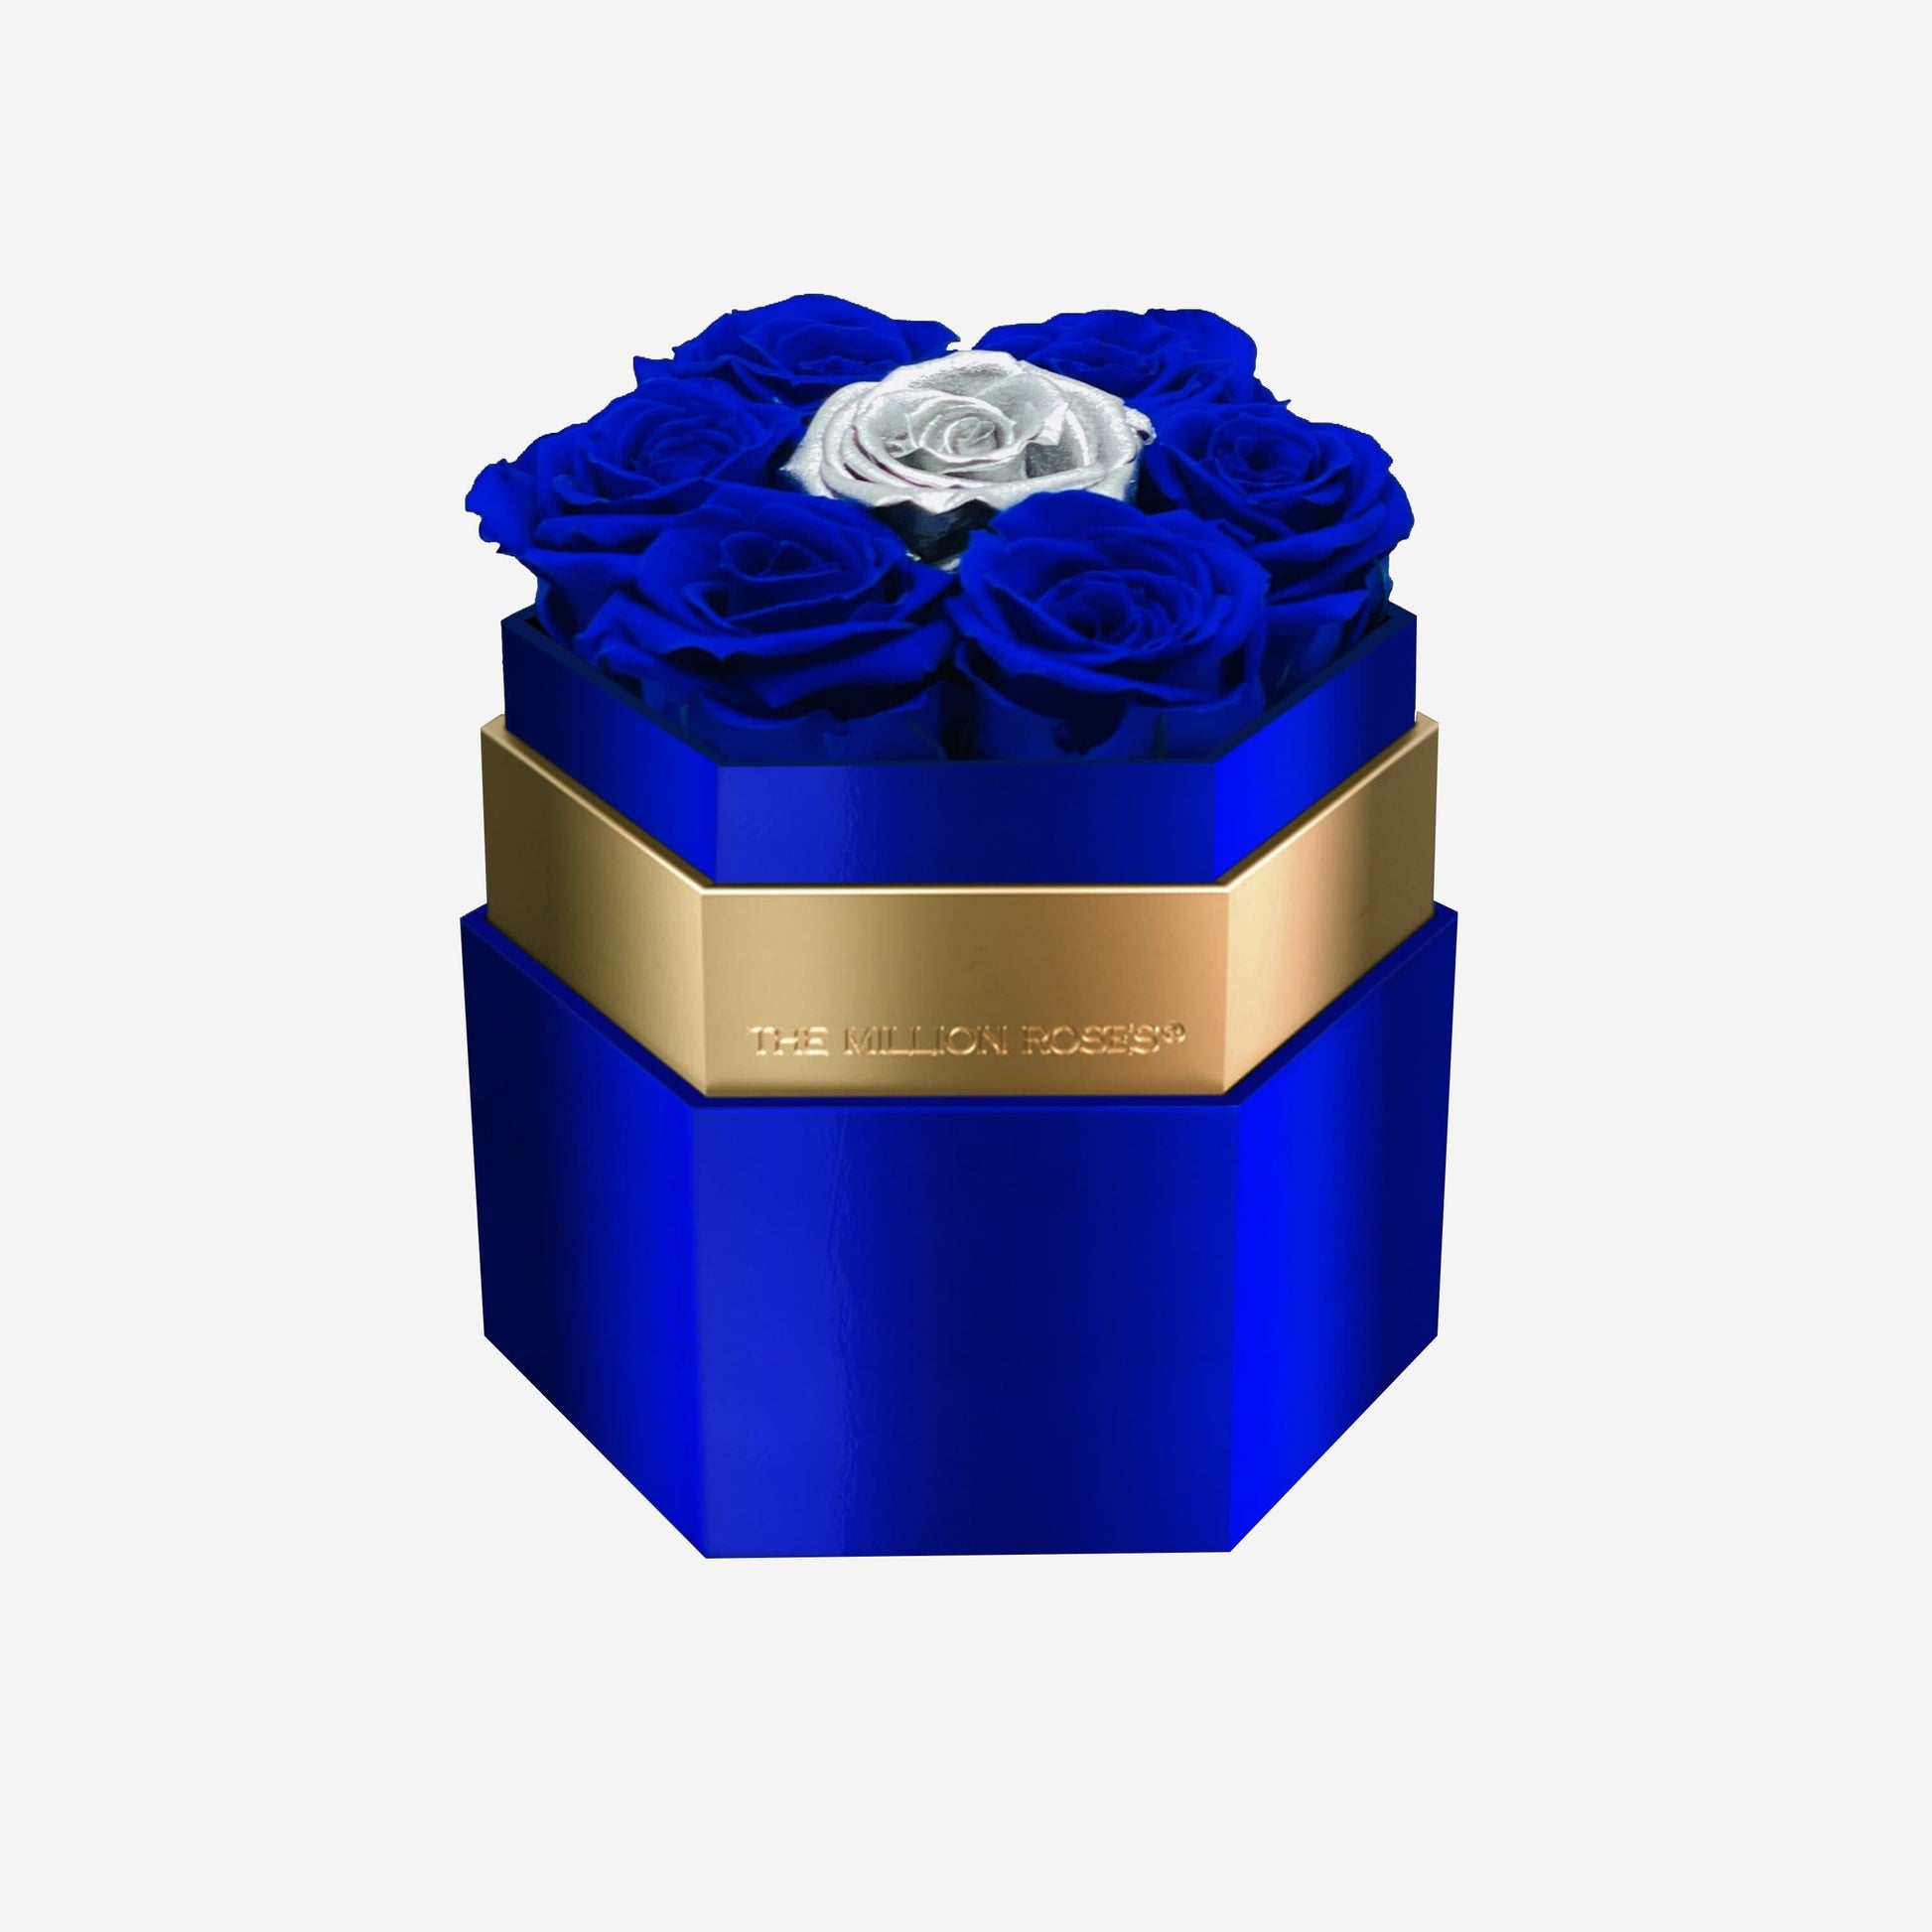 One in a Million™ Mirror Blue Hexagon Box | Dark Blue & Silver Roses - The Million Roses